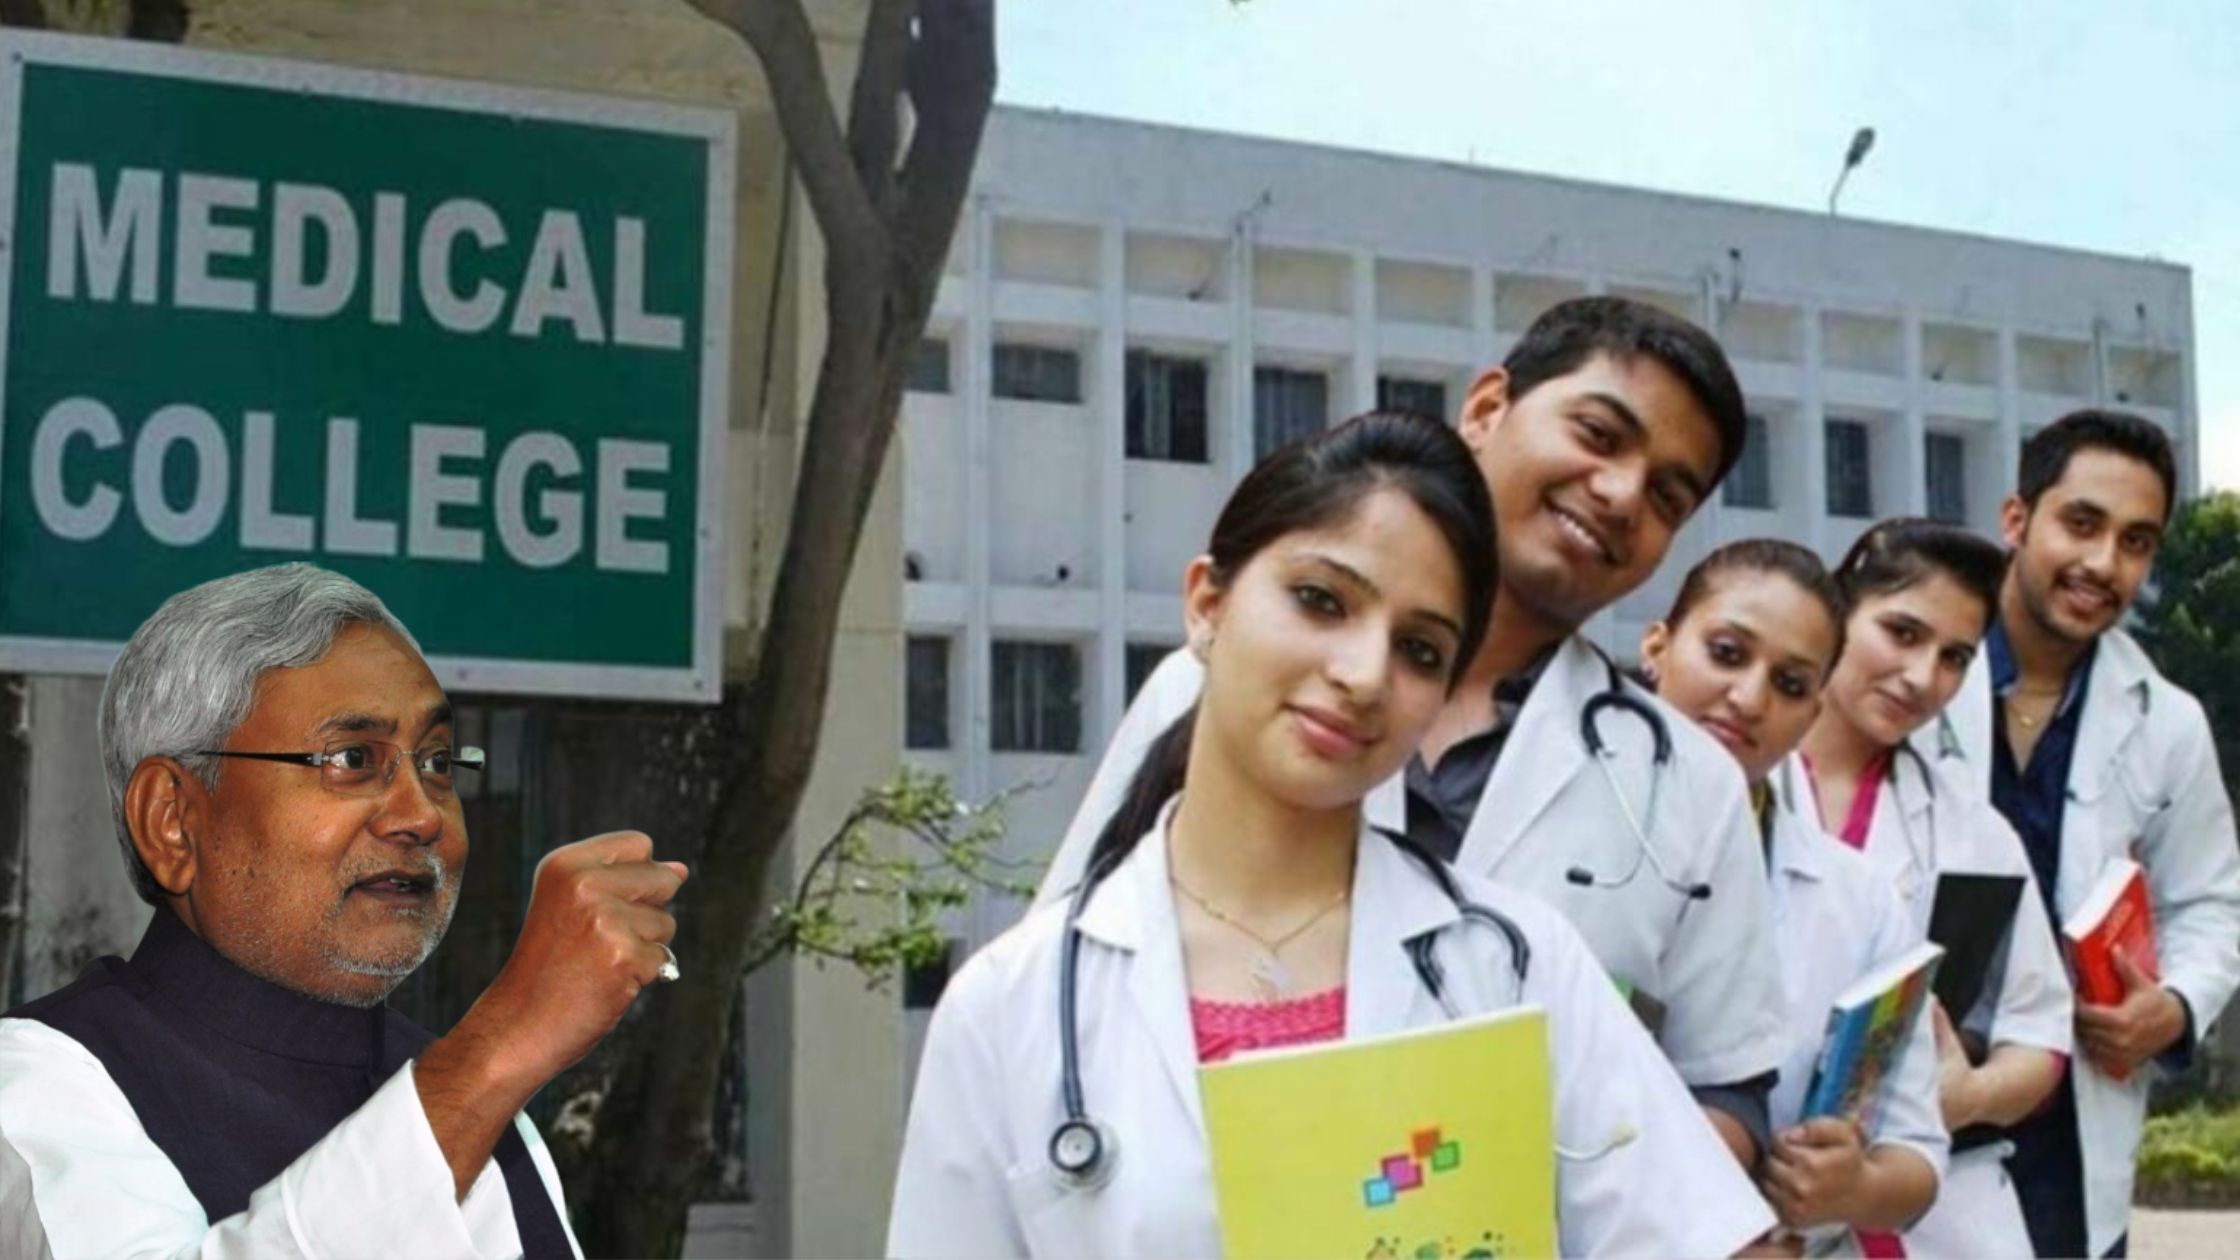 Medical college will open in every district of Bihar